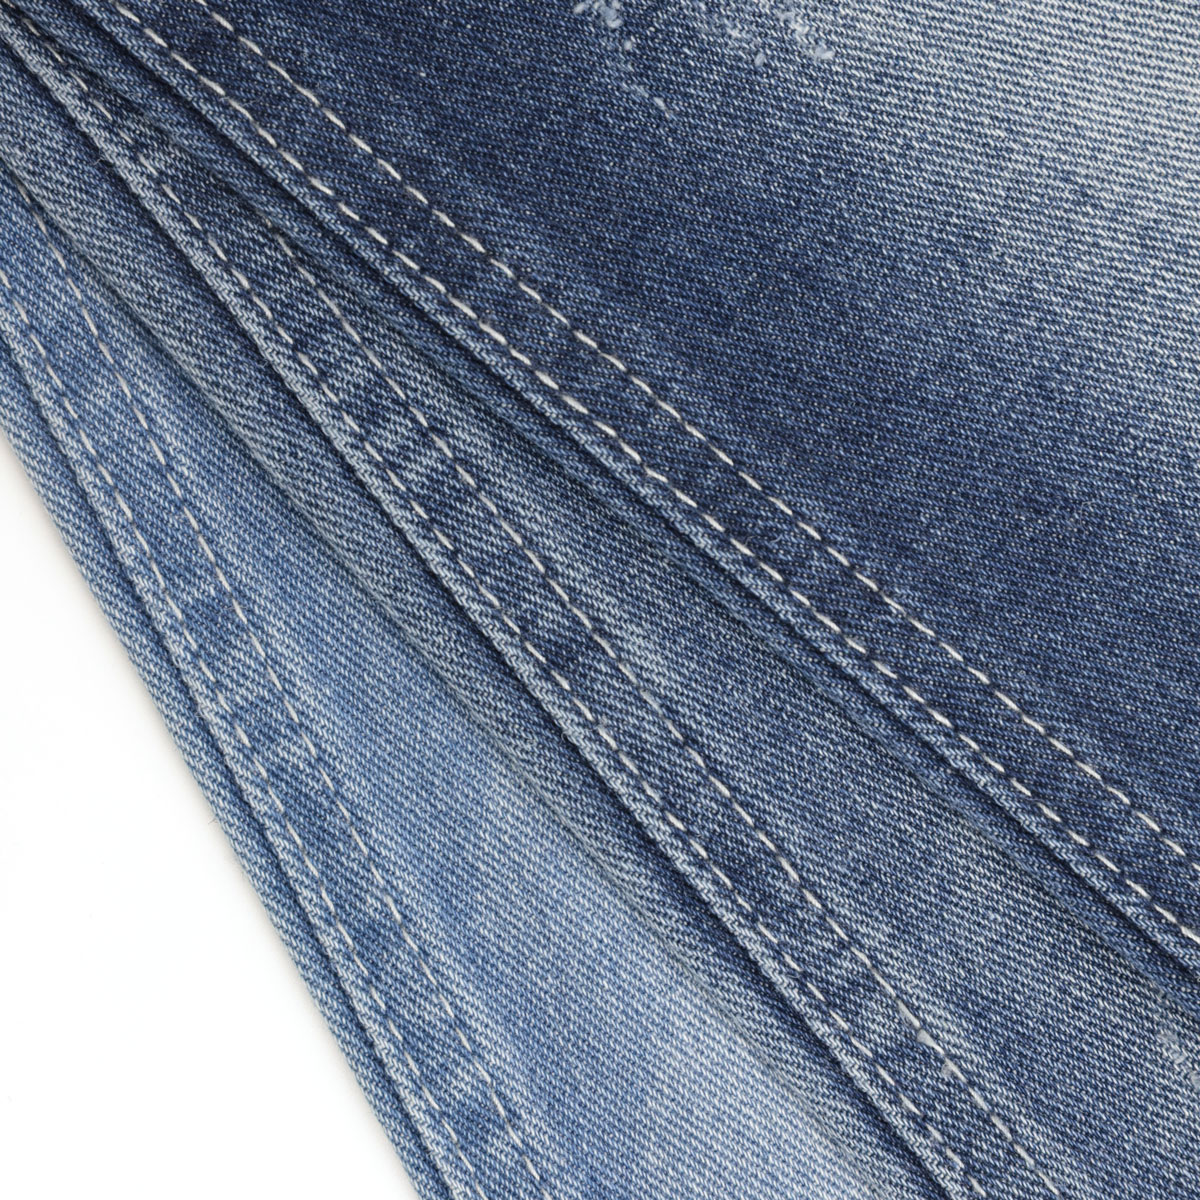 Denim Fabric Knowledge: the Remarkable Characteristics of Jeans Different From General Clothing 1